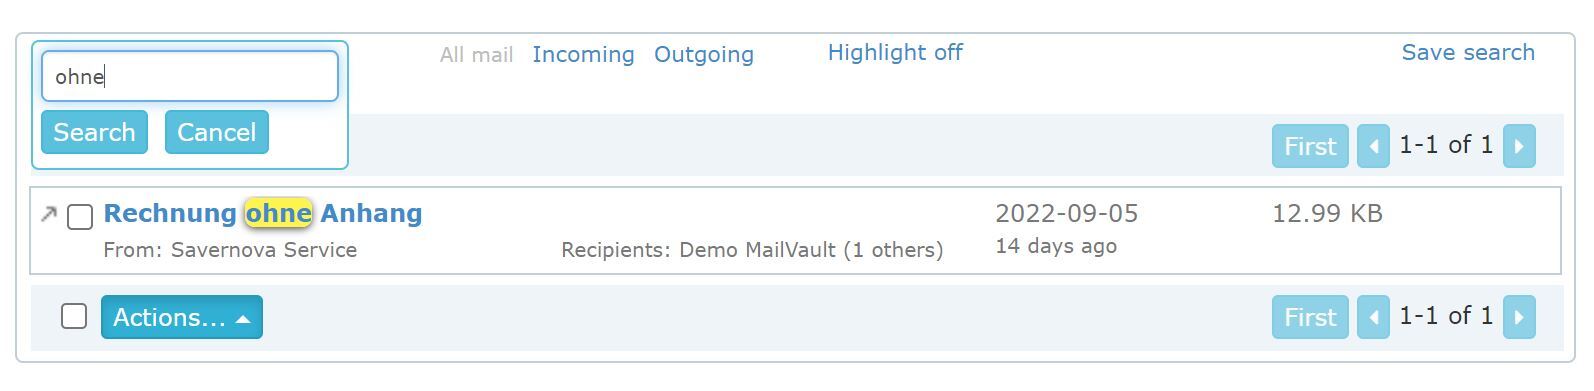 MailValt - Search within results - result